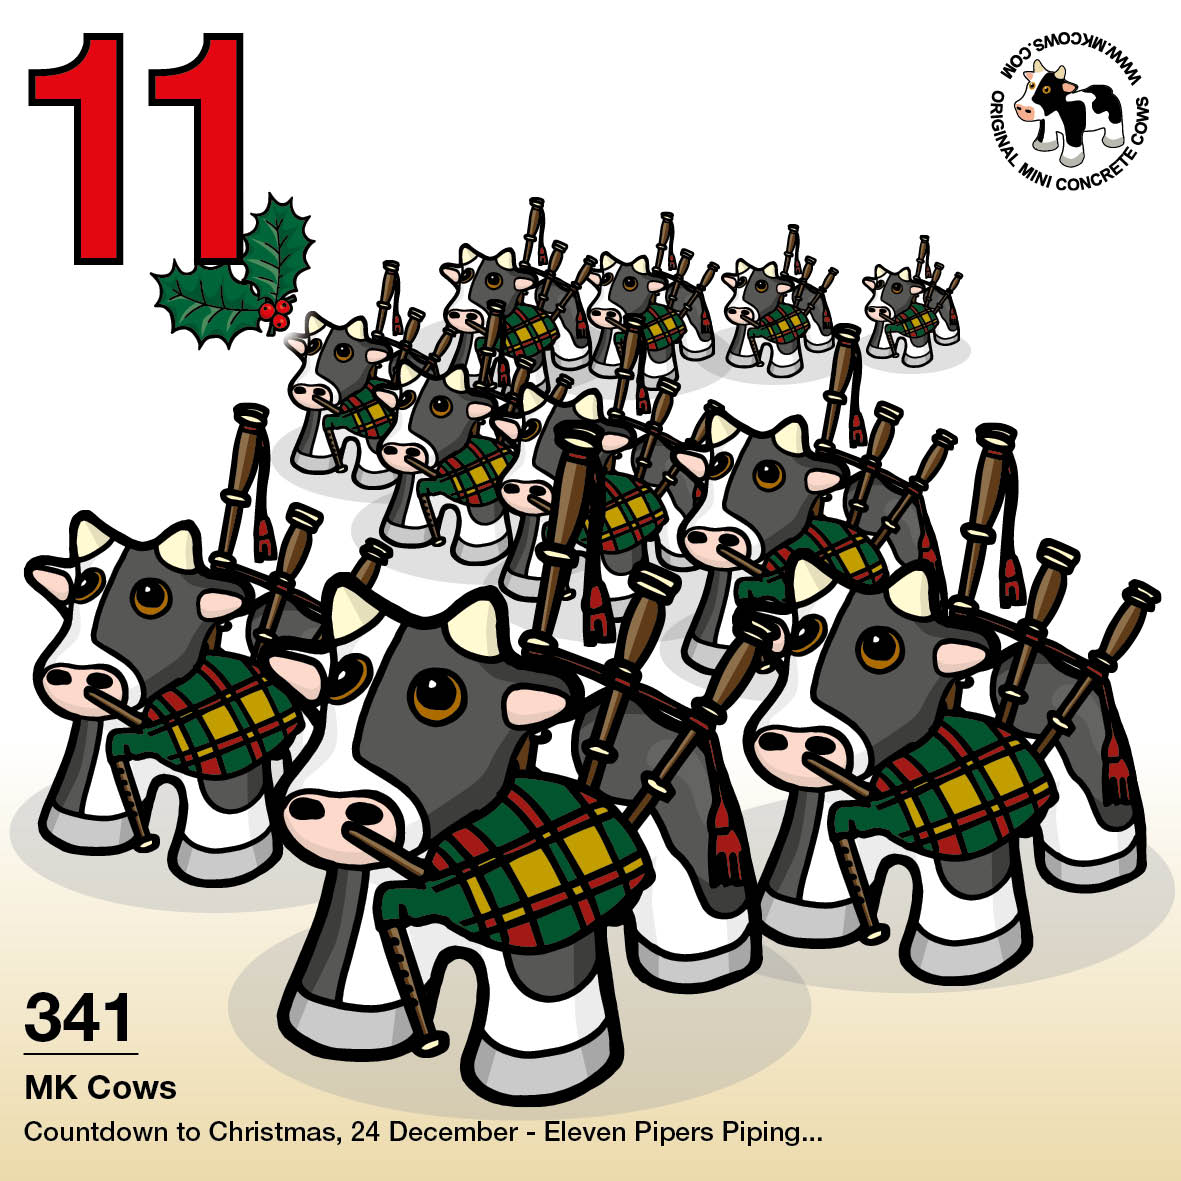 On the eleventh day of Christmas my moo cow gave to me... eleven pipers piping (with Mini Concrete Cows!)